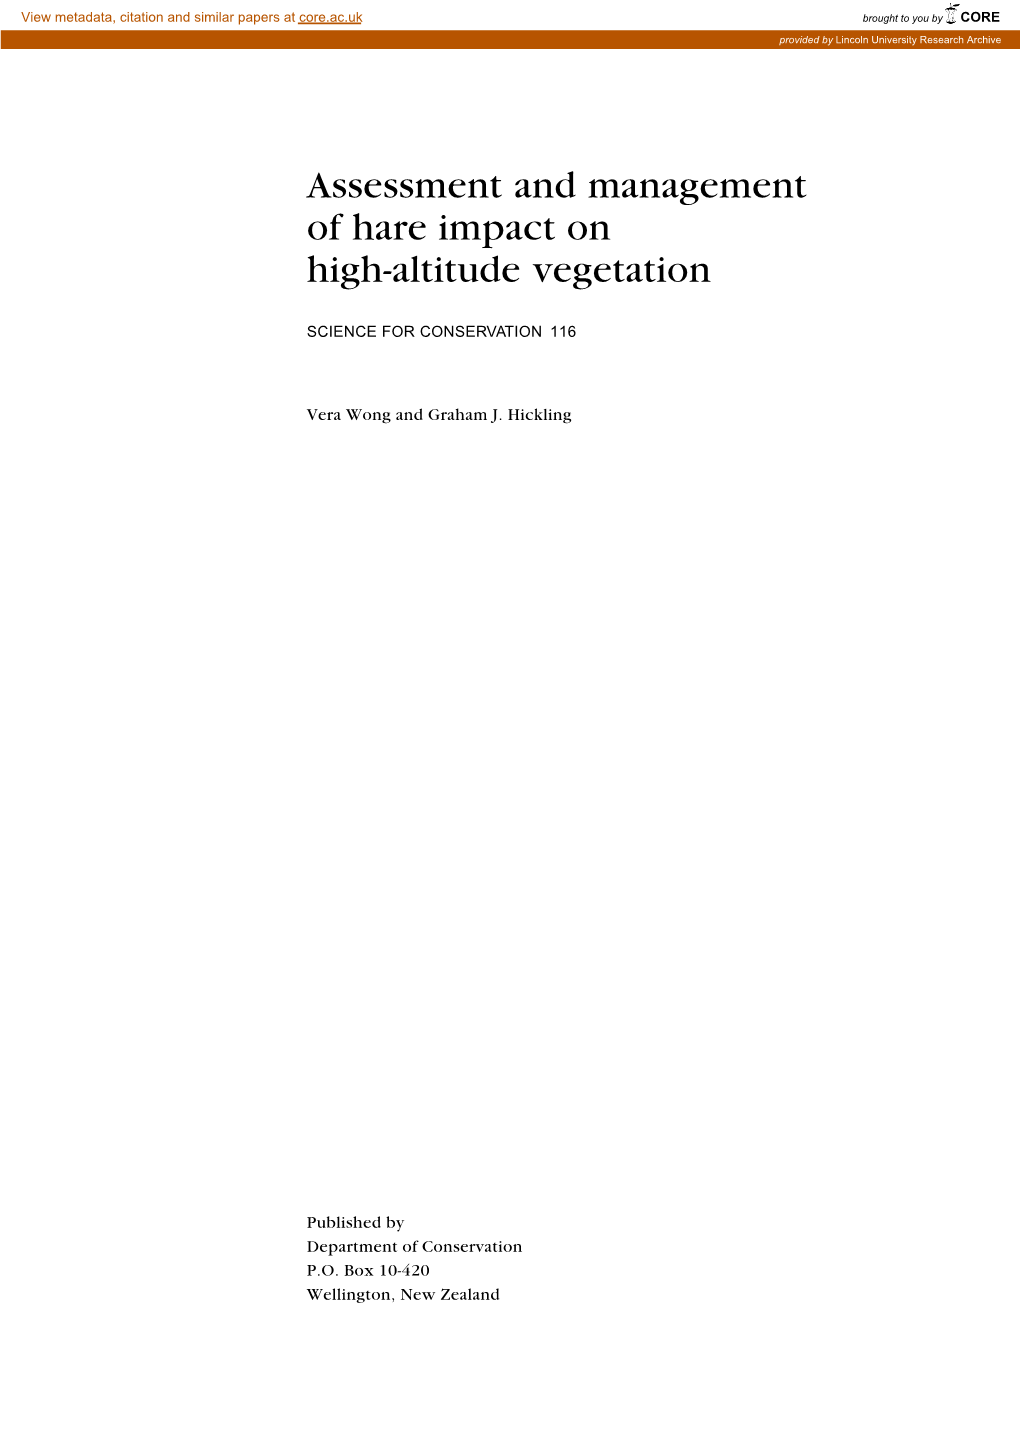 Assessment and Management of Hare Impact on High-Altitude Vegetation